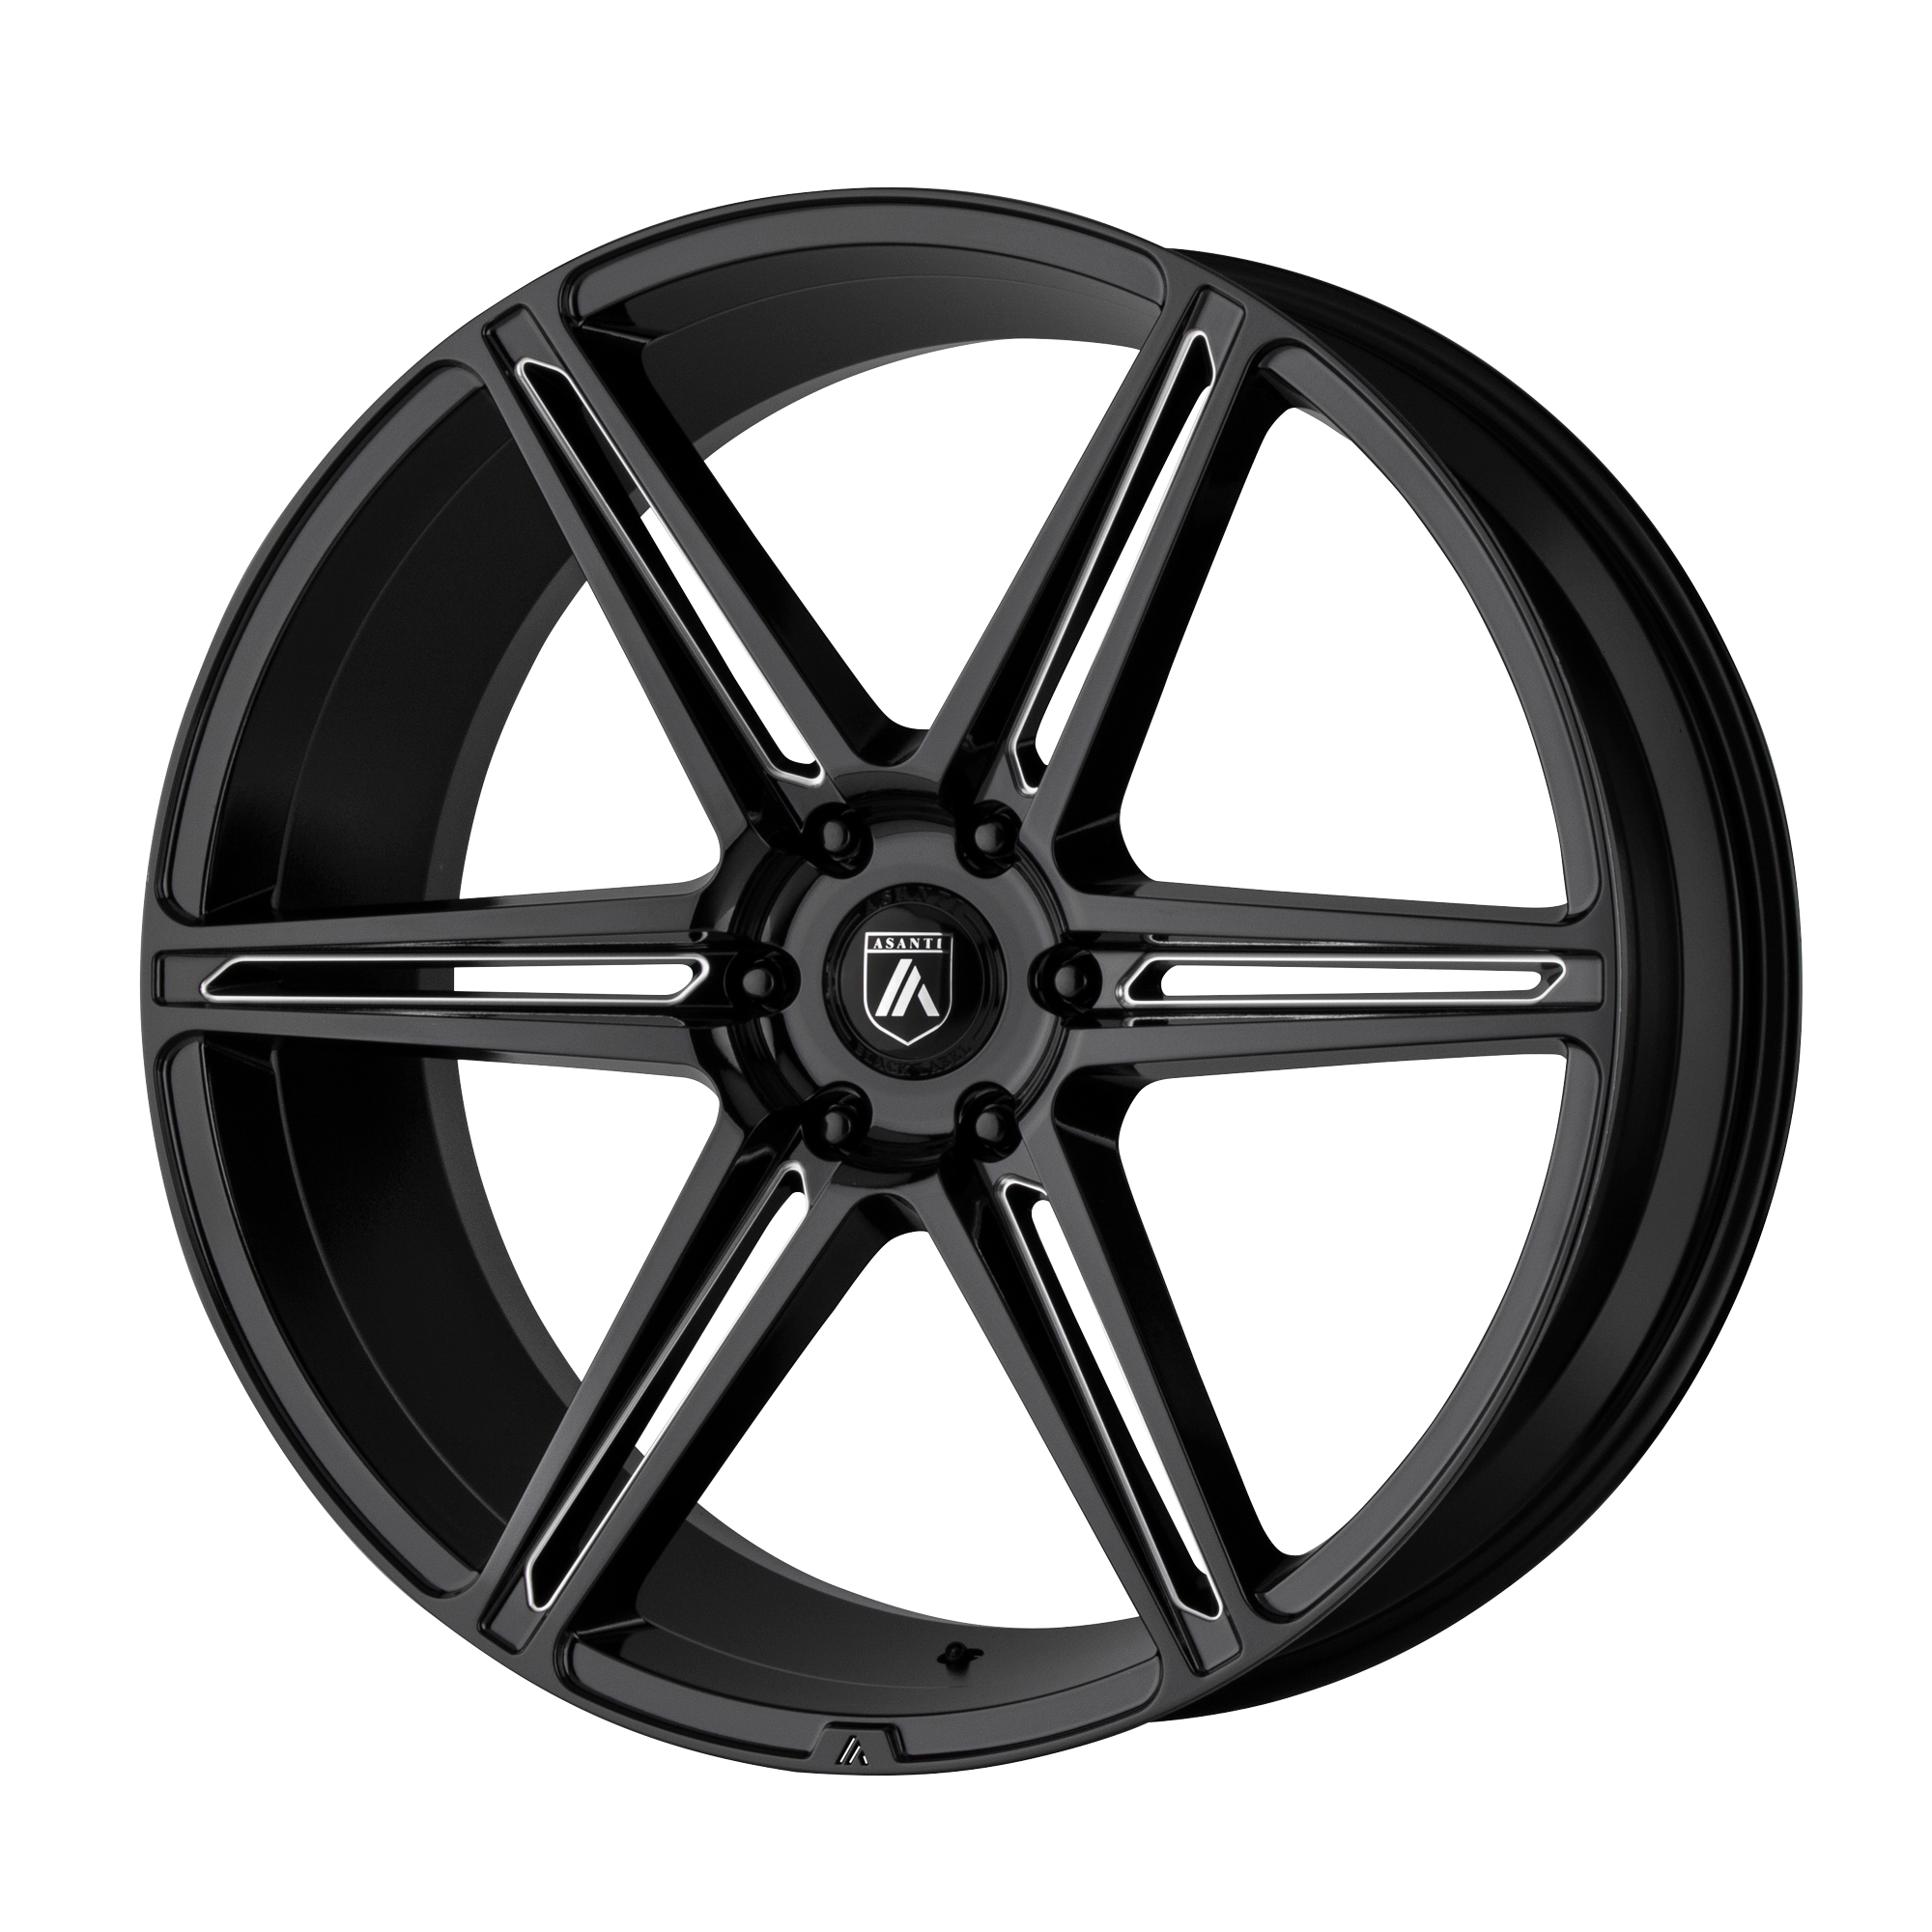 ALPHA 6 22x10 6x135.00 GLOSS BLACK MILLED (30 mm) - Tires and Engine Performance